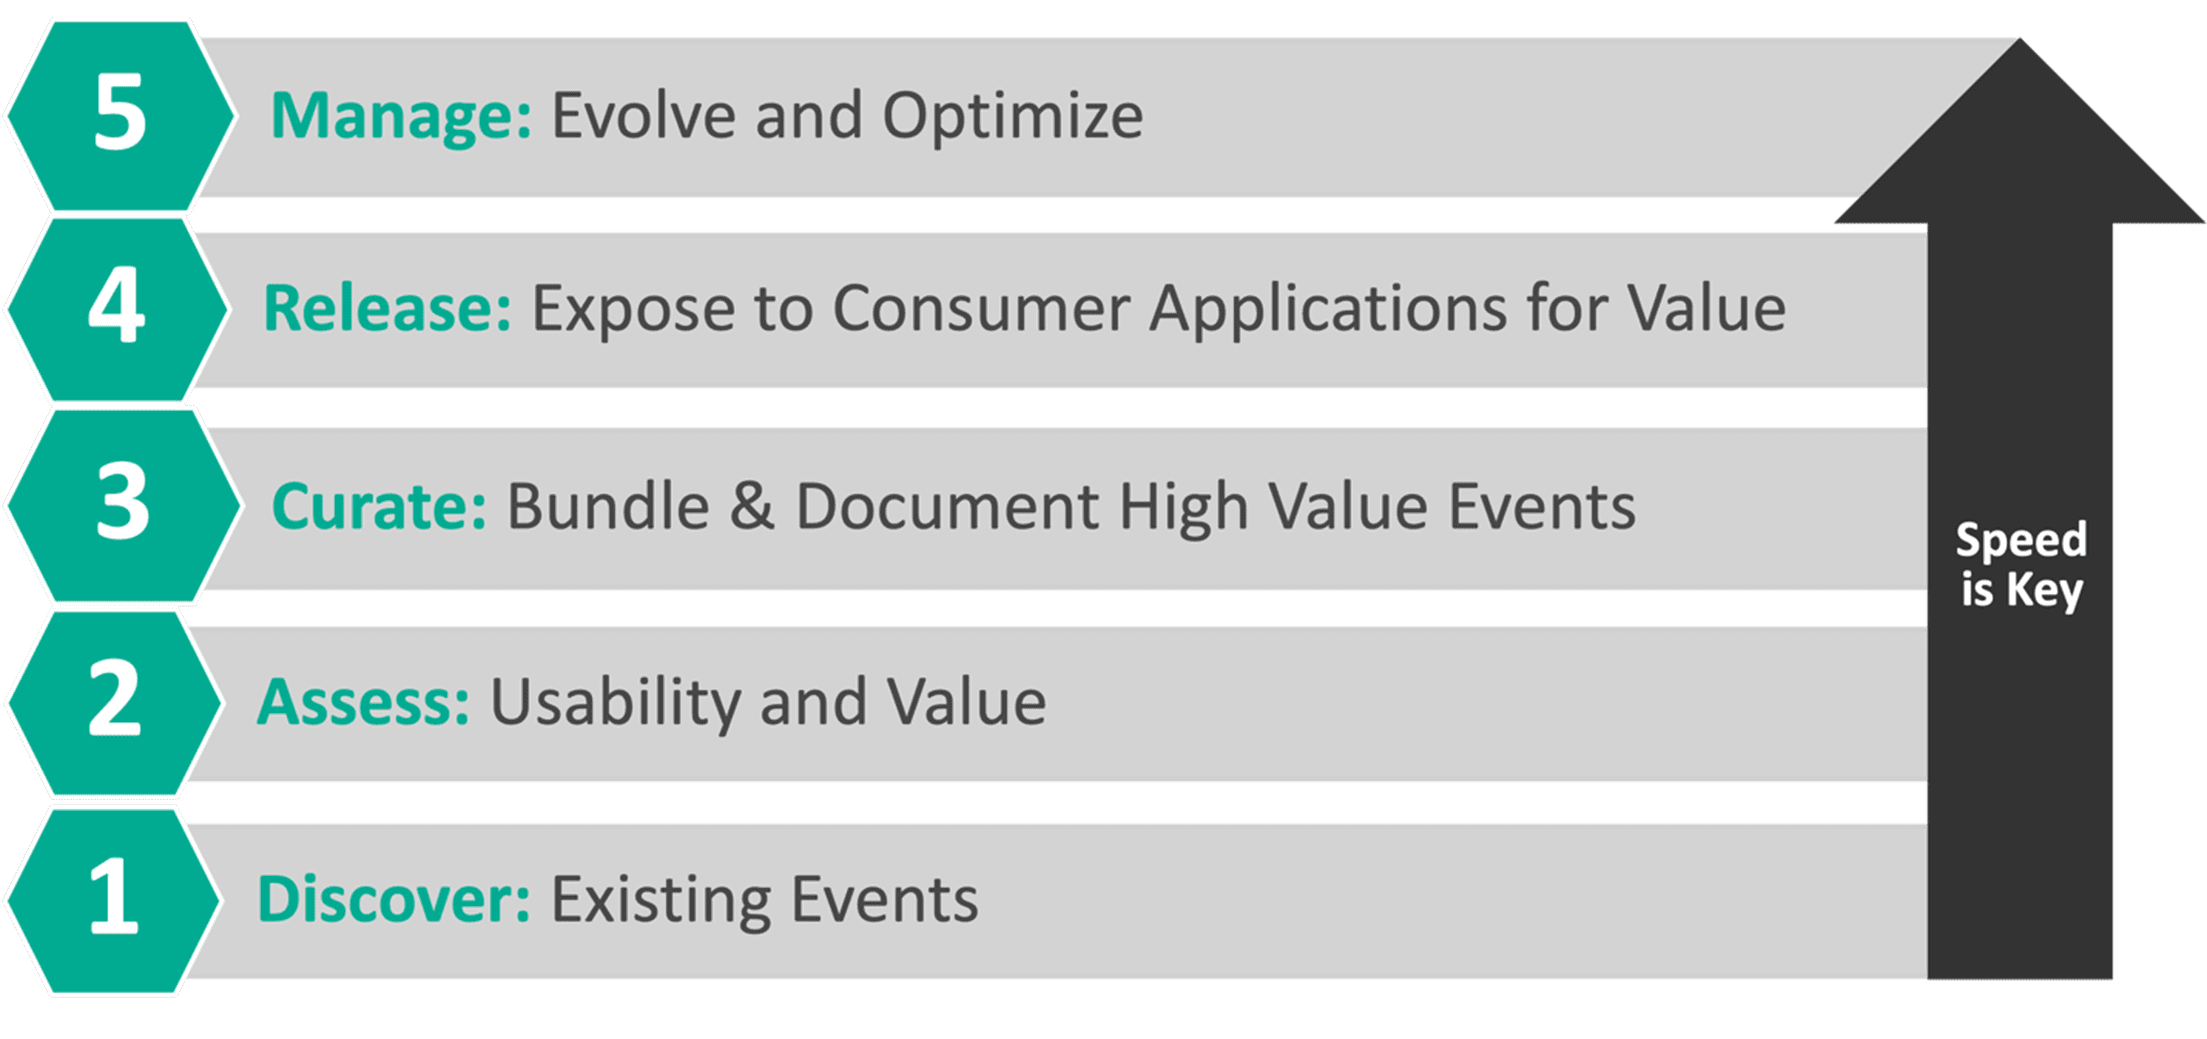 This infographic shows Solace's five step process to designing event-driven APIs: Discover, Assess, Curate, Release, and Manage. 